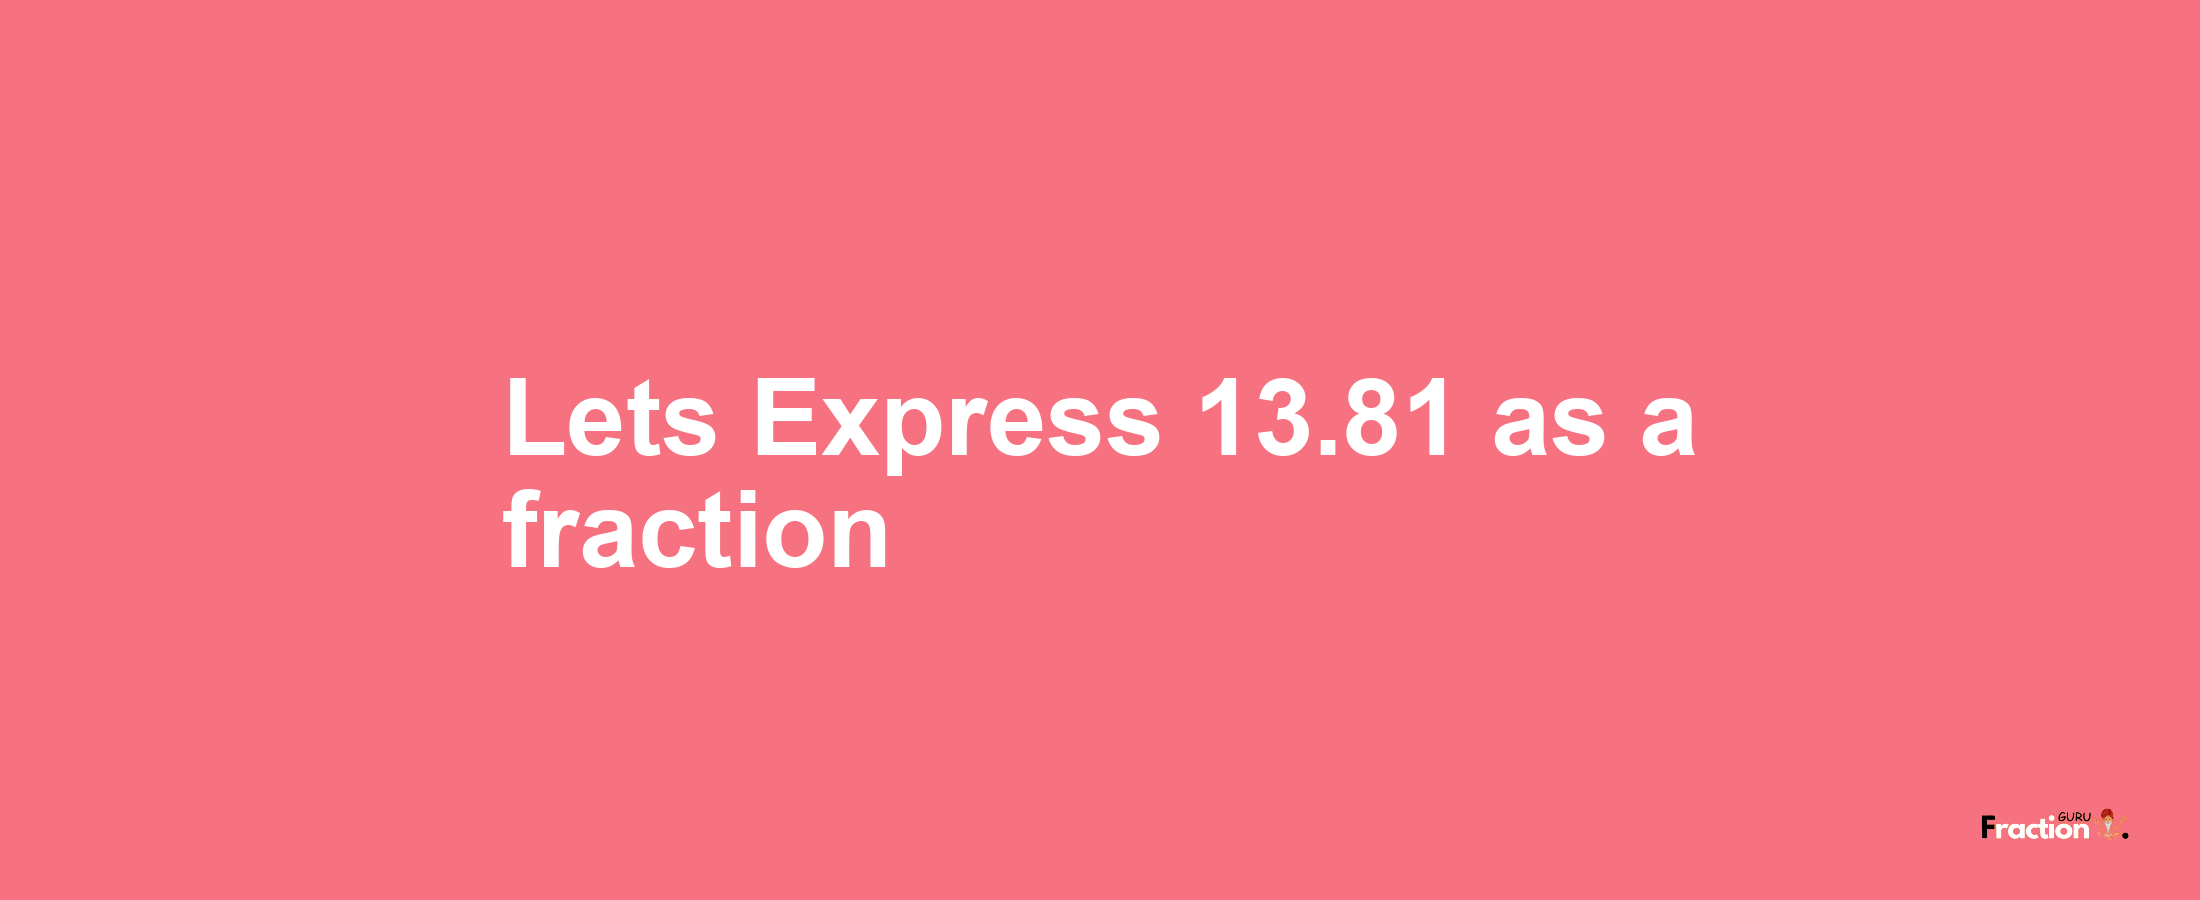 Lets Express 13.81 as afraction